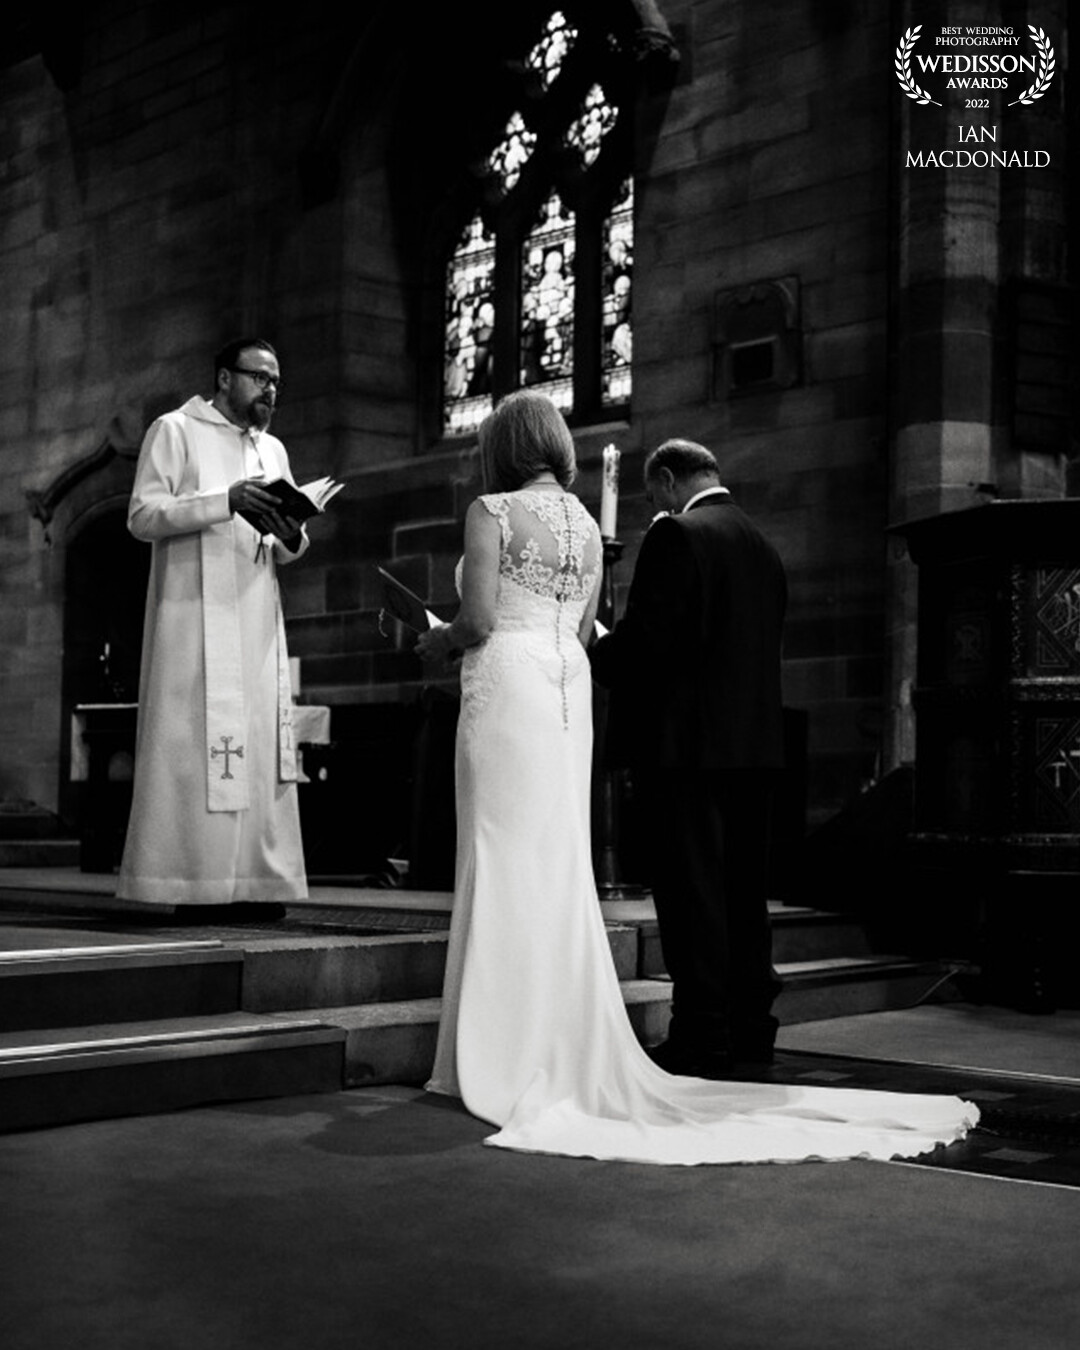 The Classic Black and white. This Church in my home town of Madeley has its oldest parts dating back to the 12th Century, with the vast majority of it being 14th century. A stunning venue for a wedding.